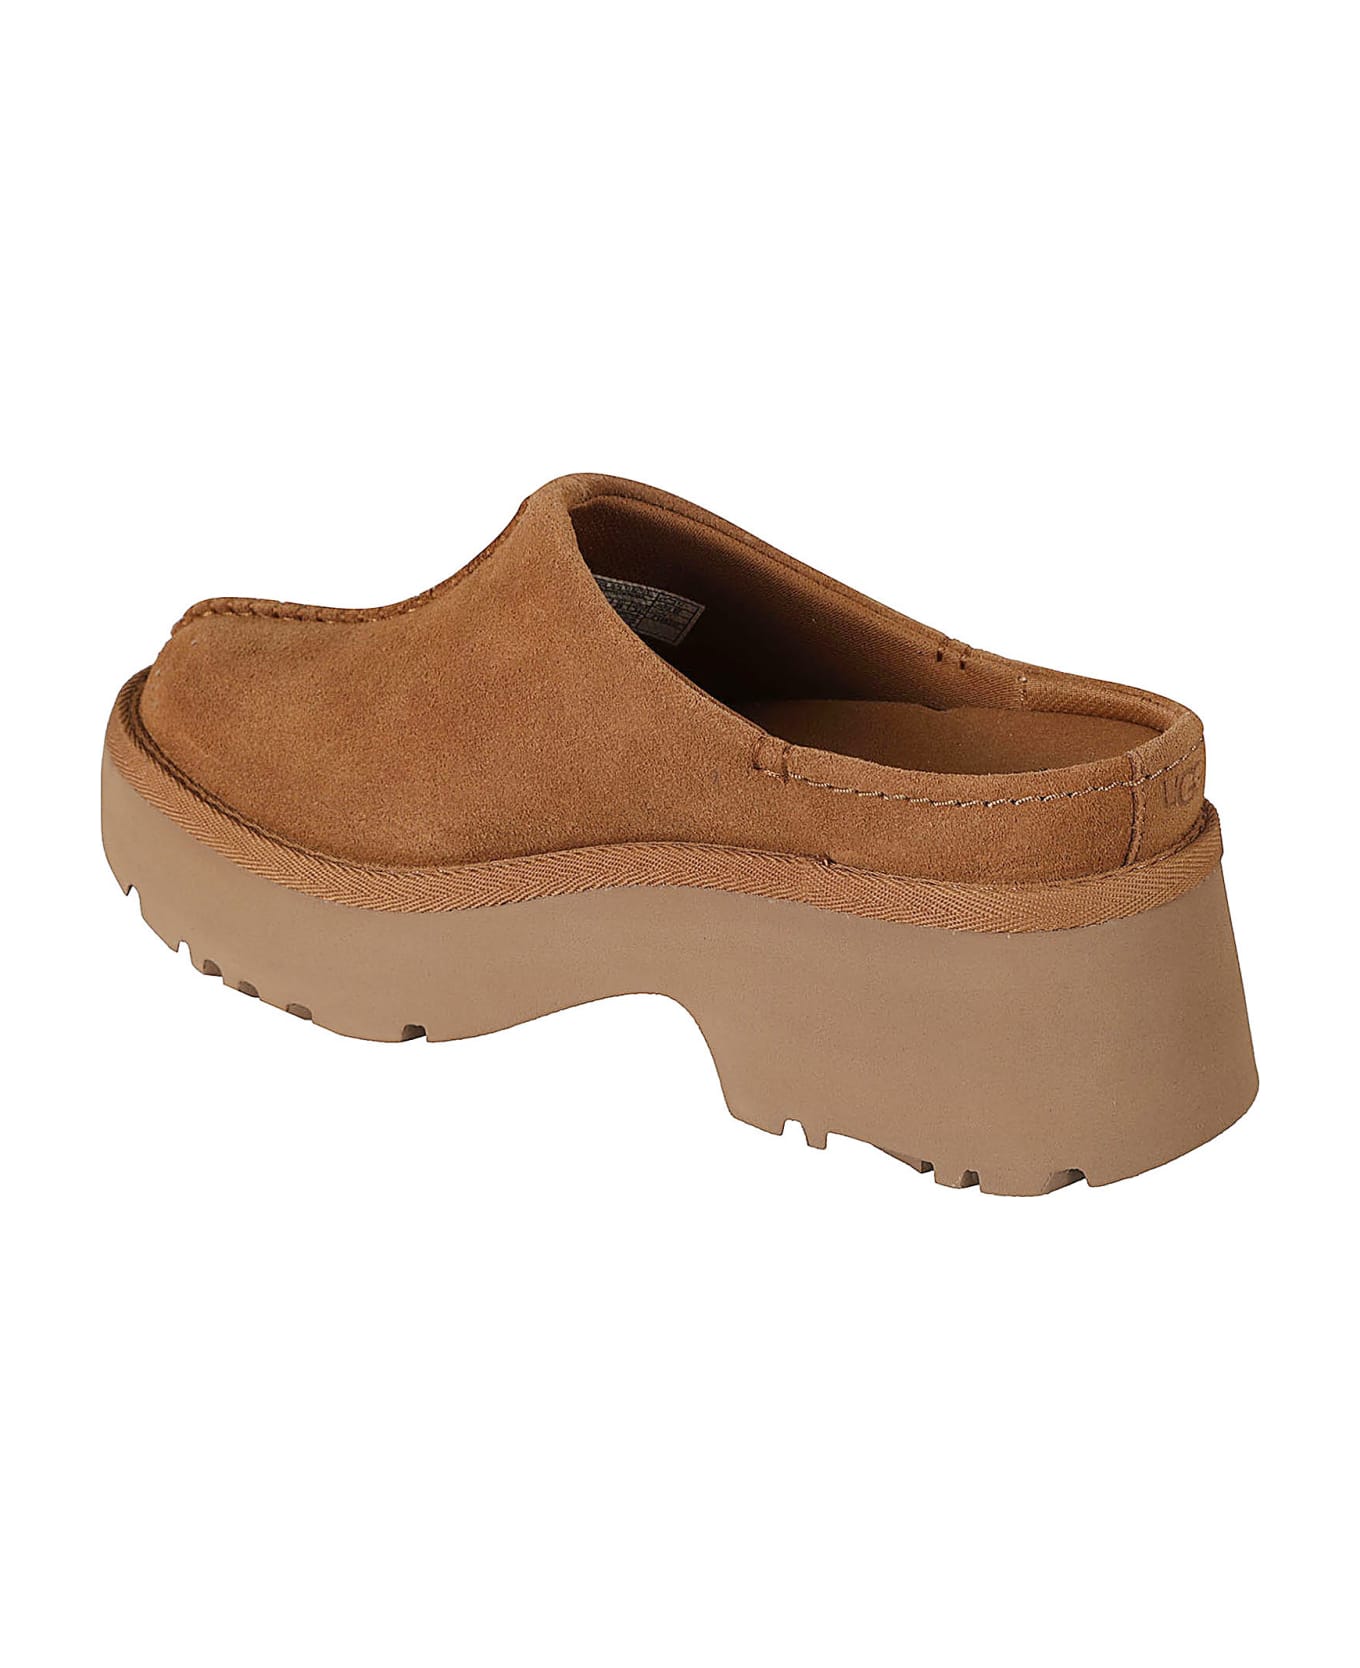 UGG New Heights Clogs - CHESTNUT